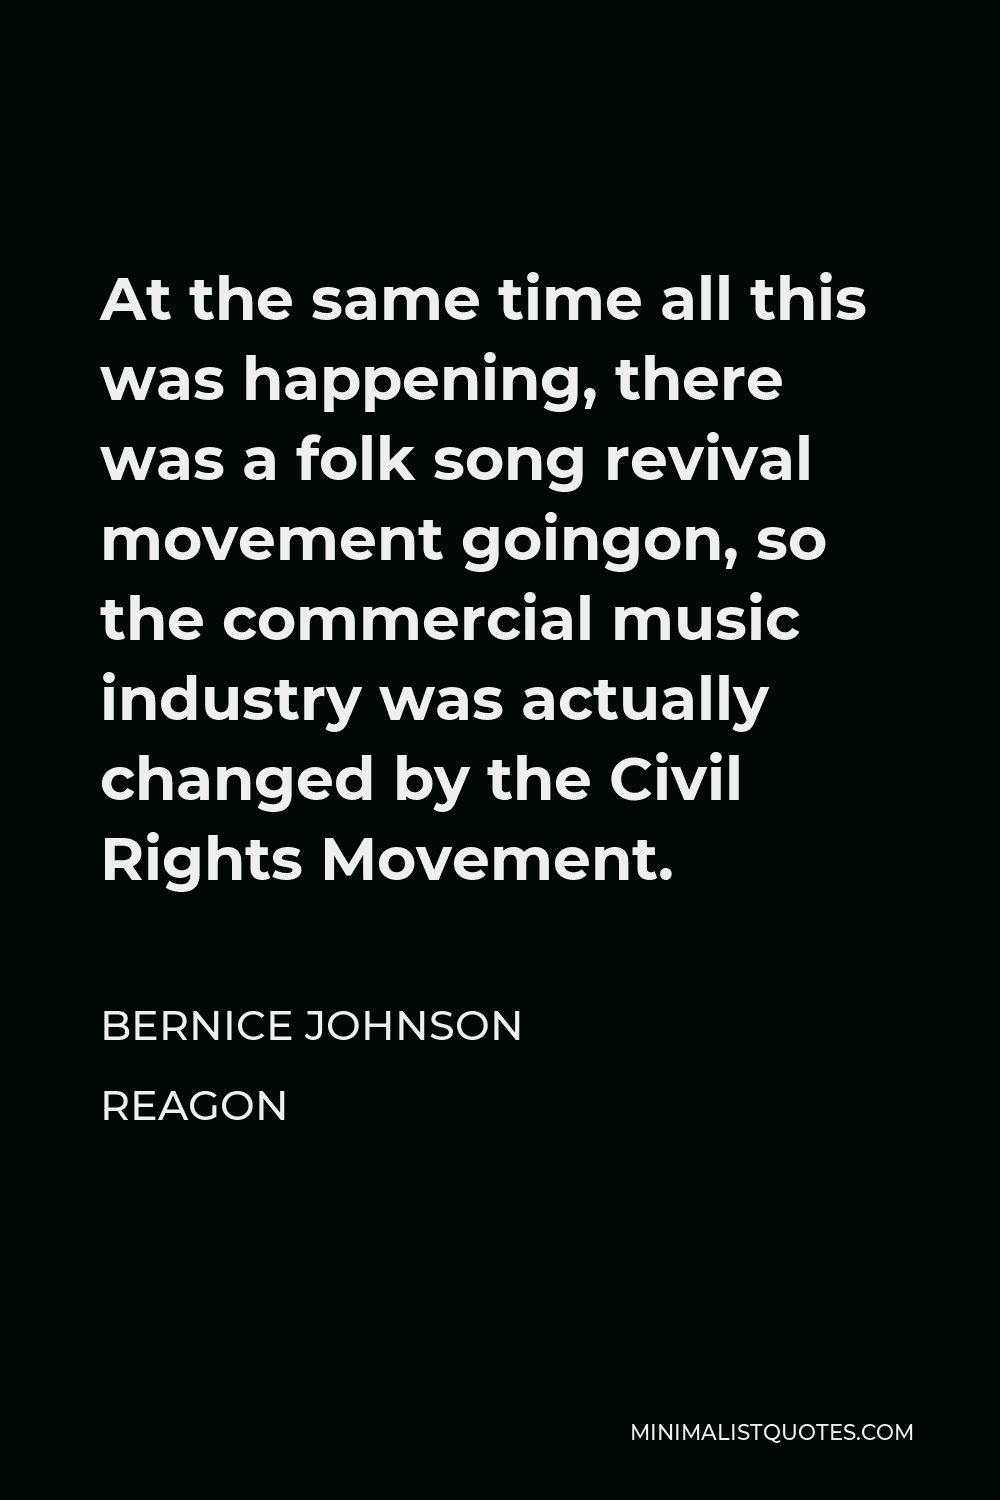 Bernice Johnson Reagon Quote - At the same time all this was happening, there was a folk song revival movement goingon, so the commercial music industry was actually changed by the Civil Rights Movement.